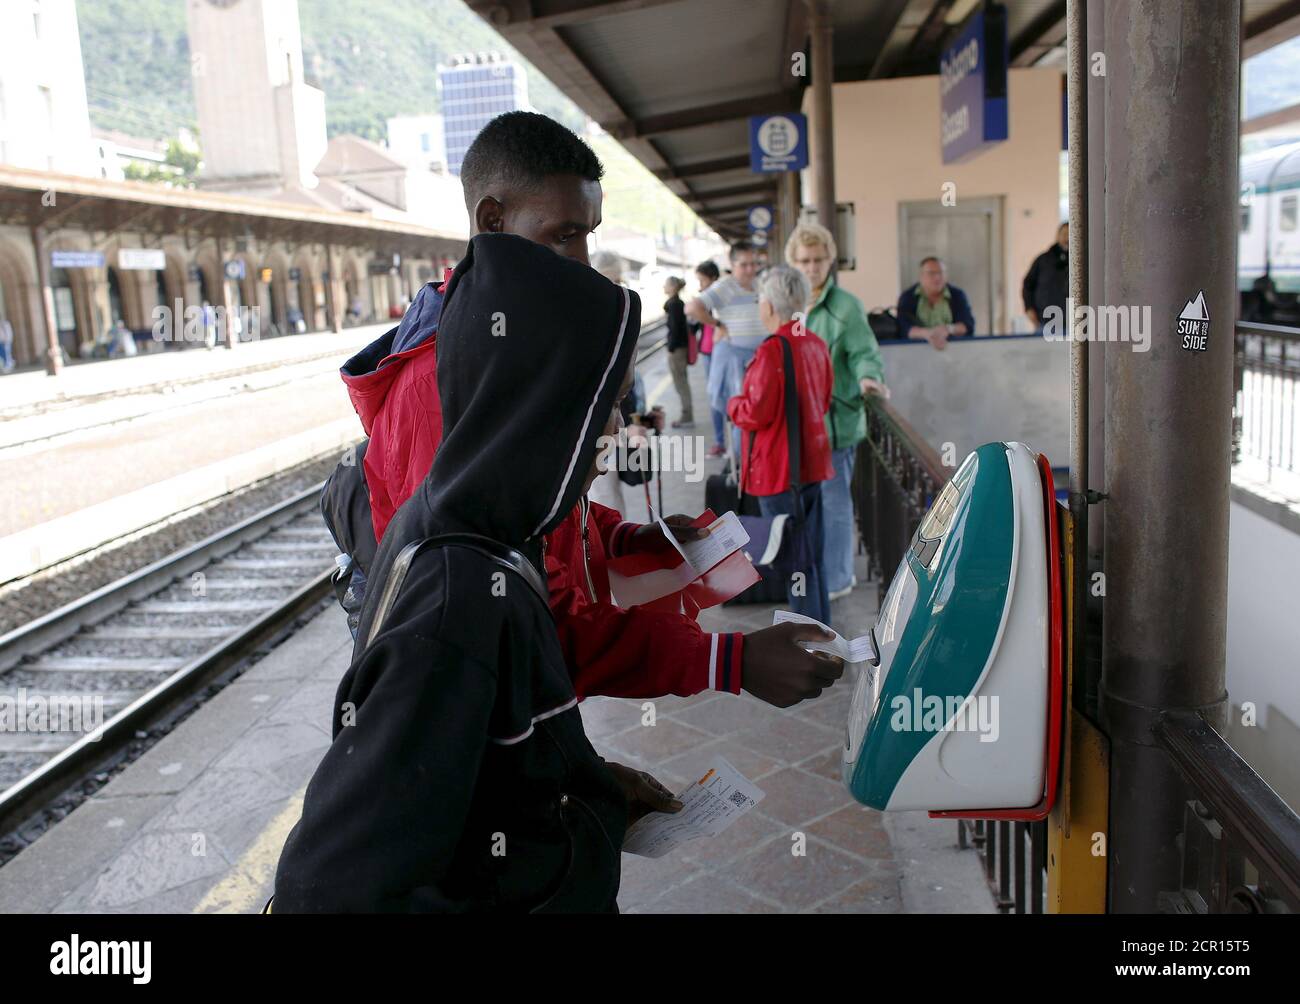 Migrants validate their train tickets at the Bolzano railway station, northern Italy, May 28, 2015. EU asylum rules, known as the Dublin Regulation, were first drafted in the early 1990s and require people seeking refuge to do so in the European country where they first set foot. Northern European countries defend the policy as a way to prevent multiple applications across the continent. Some are upset with what they see as Italy's lax attitude to registering asylum seekers. Earlier this year, French police stopped about 1,000 migrants near the border and returned them to Italy. Smaller round- Stock Photo